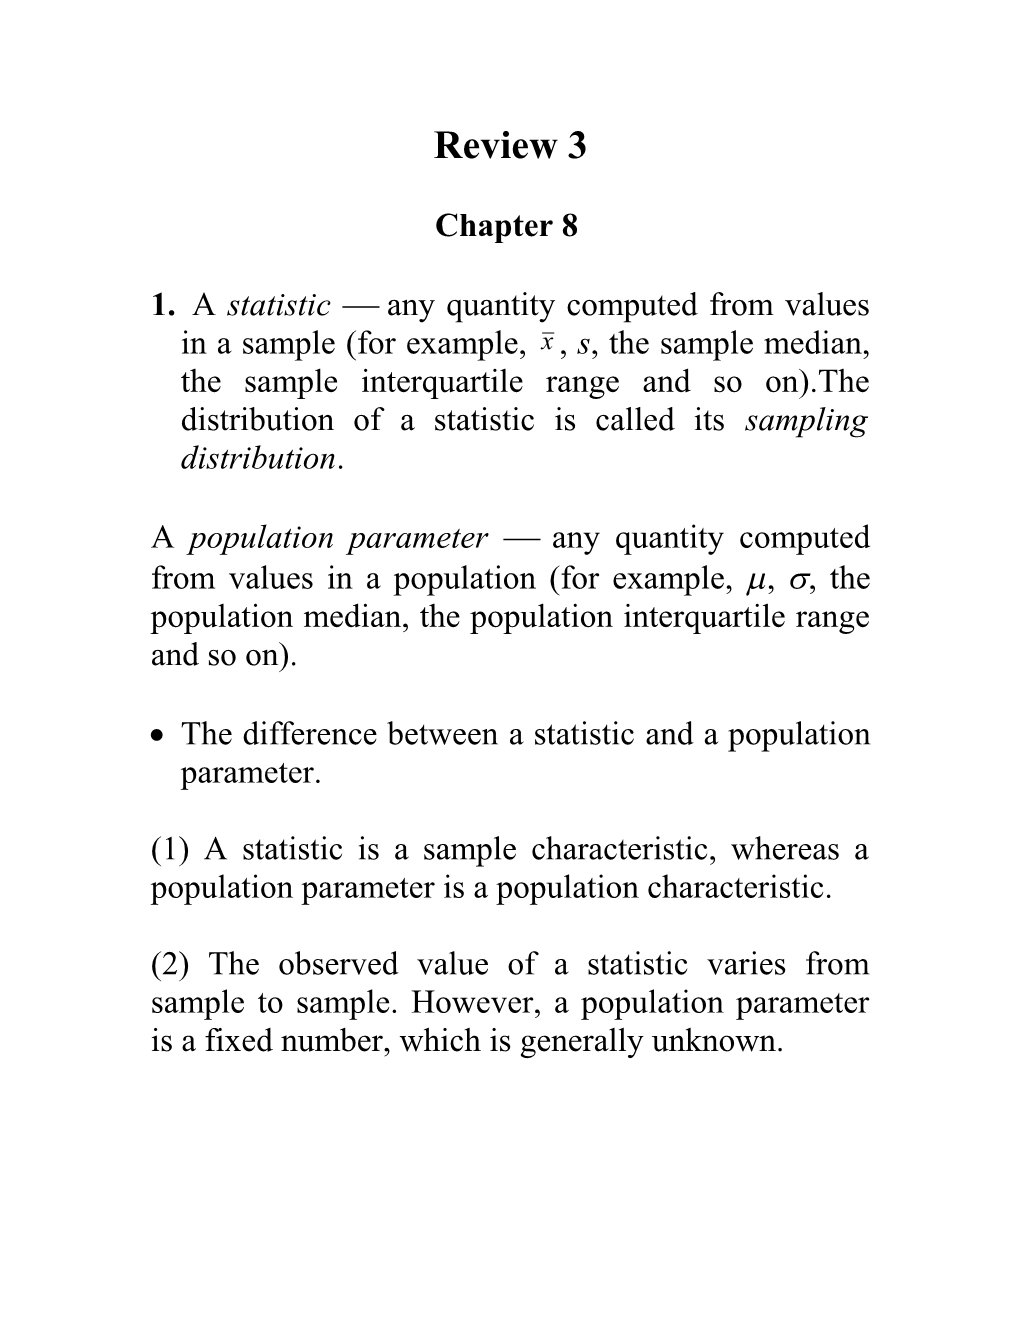 (1) a Statistic Is a Sample Characteristic, Whereas a Population Parameter Is a Population